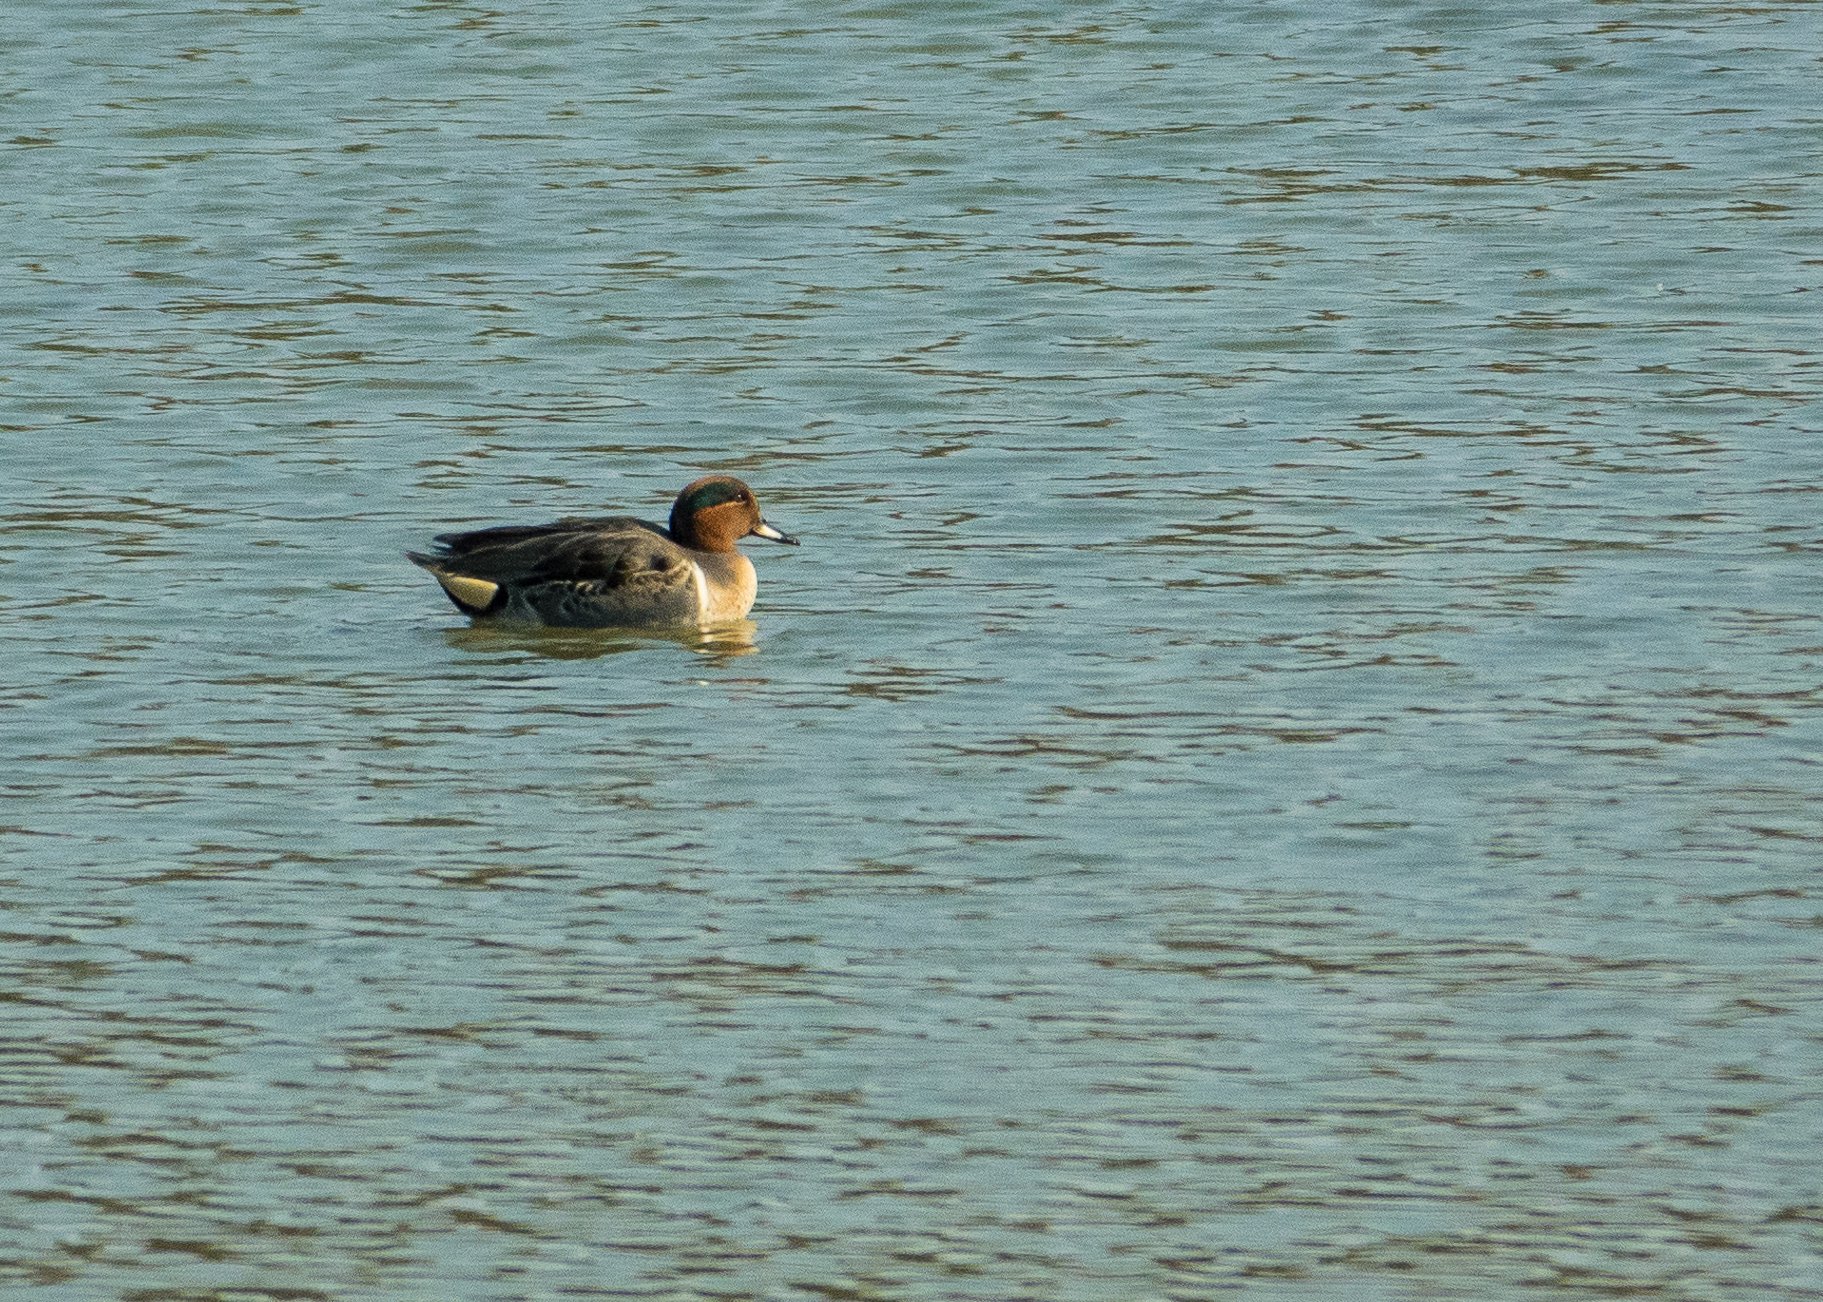  The male green-winged teal was off in another part of the sanctuary, quite far off from the females. 